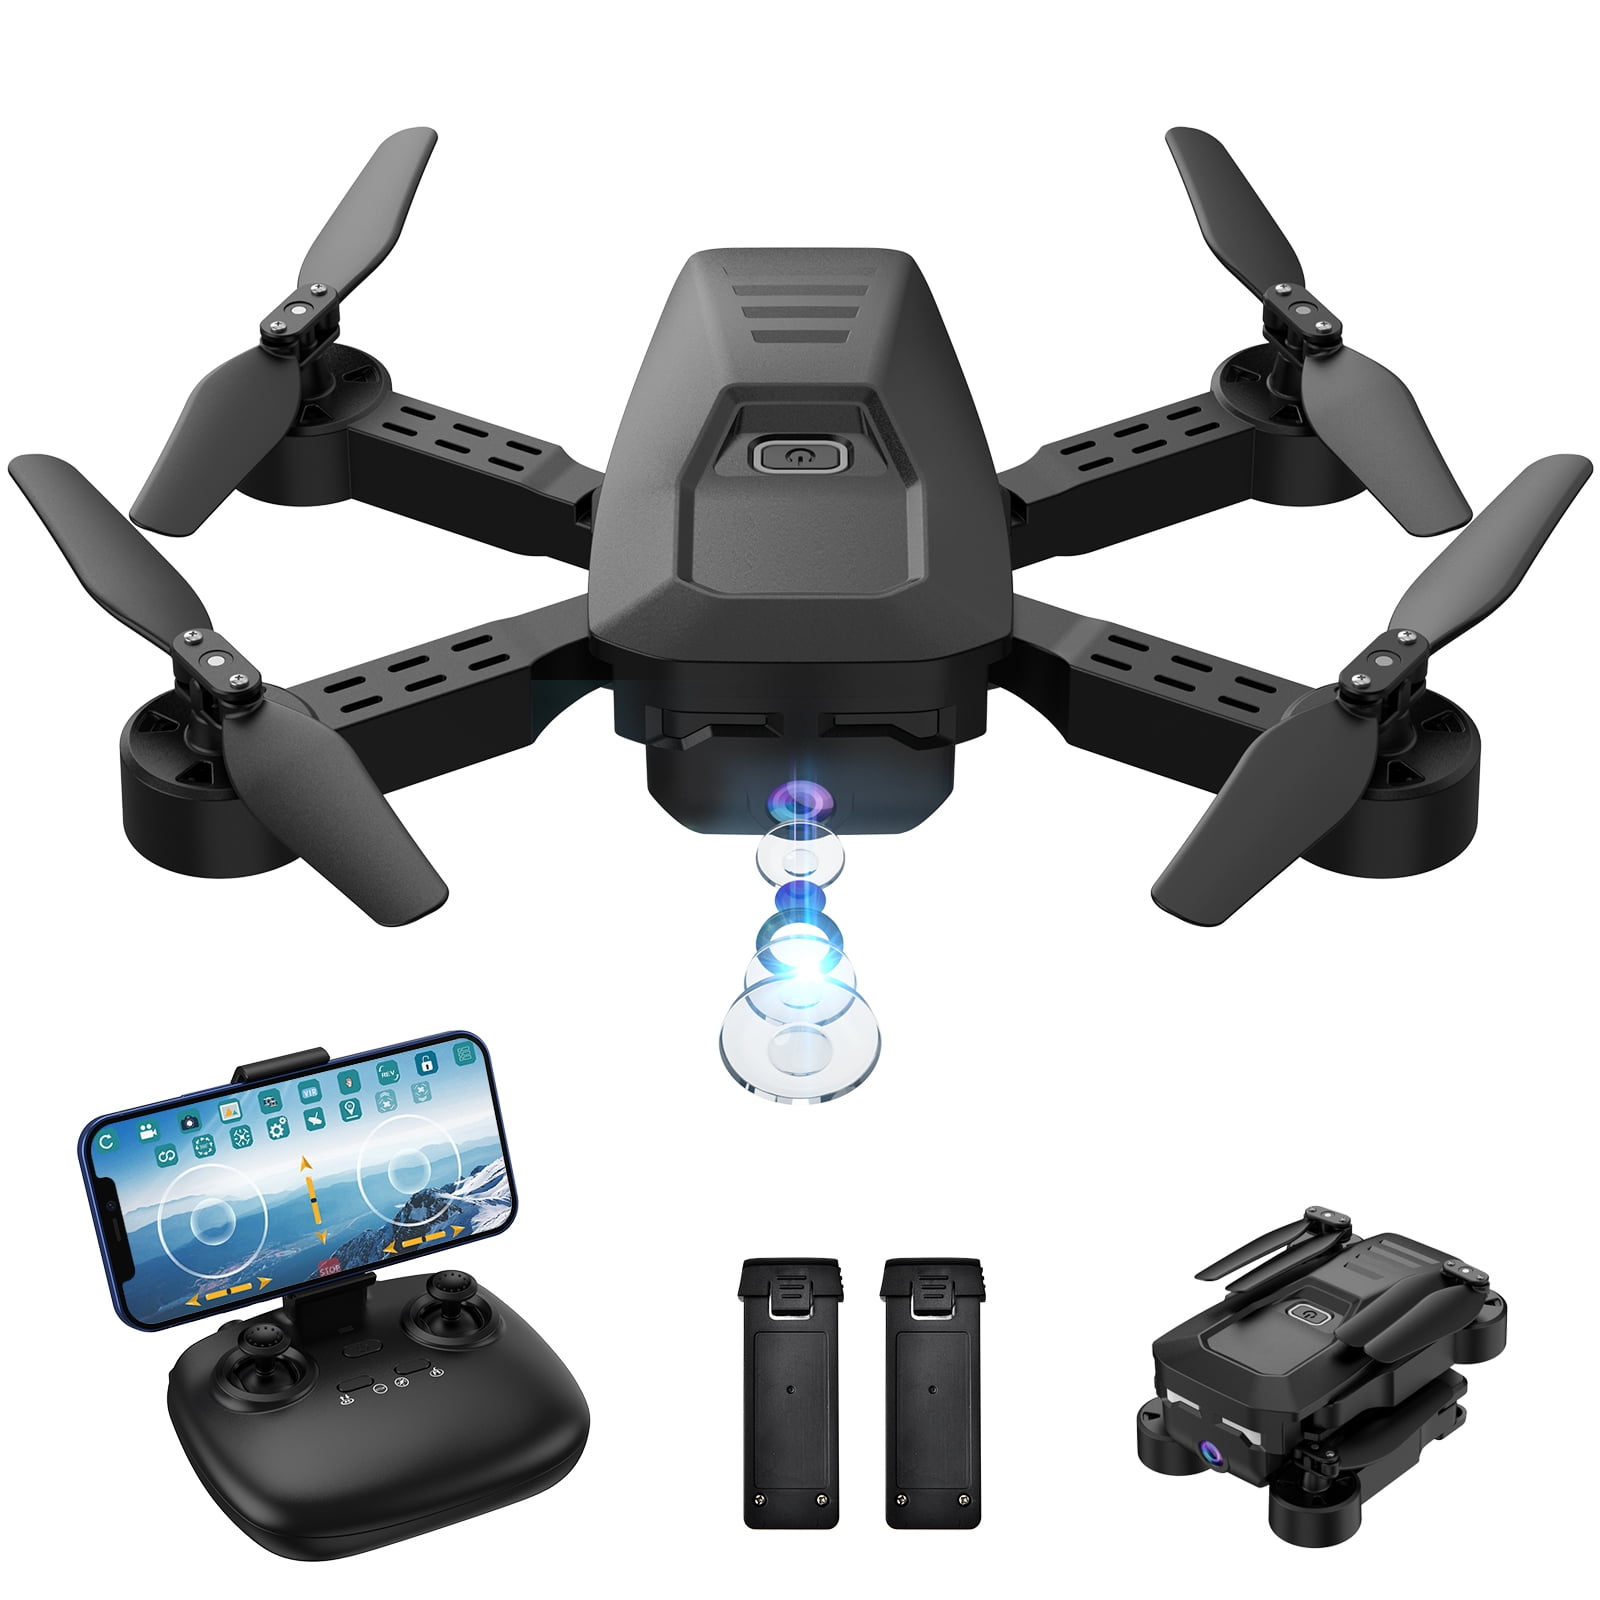 Wide-angle RC Quadcopter for Beginners Voice Control Drone with Camera for Adults Trajectory Flight FPV Live Video Headless Mode 3 Speeds Adjustable 1 Key Take On and Off Altitude Hold 